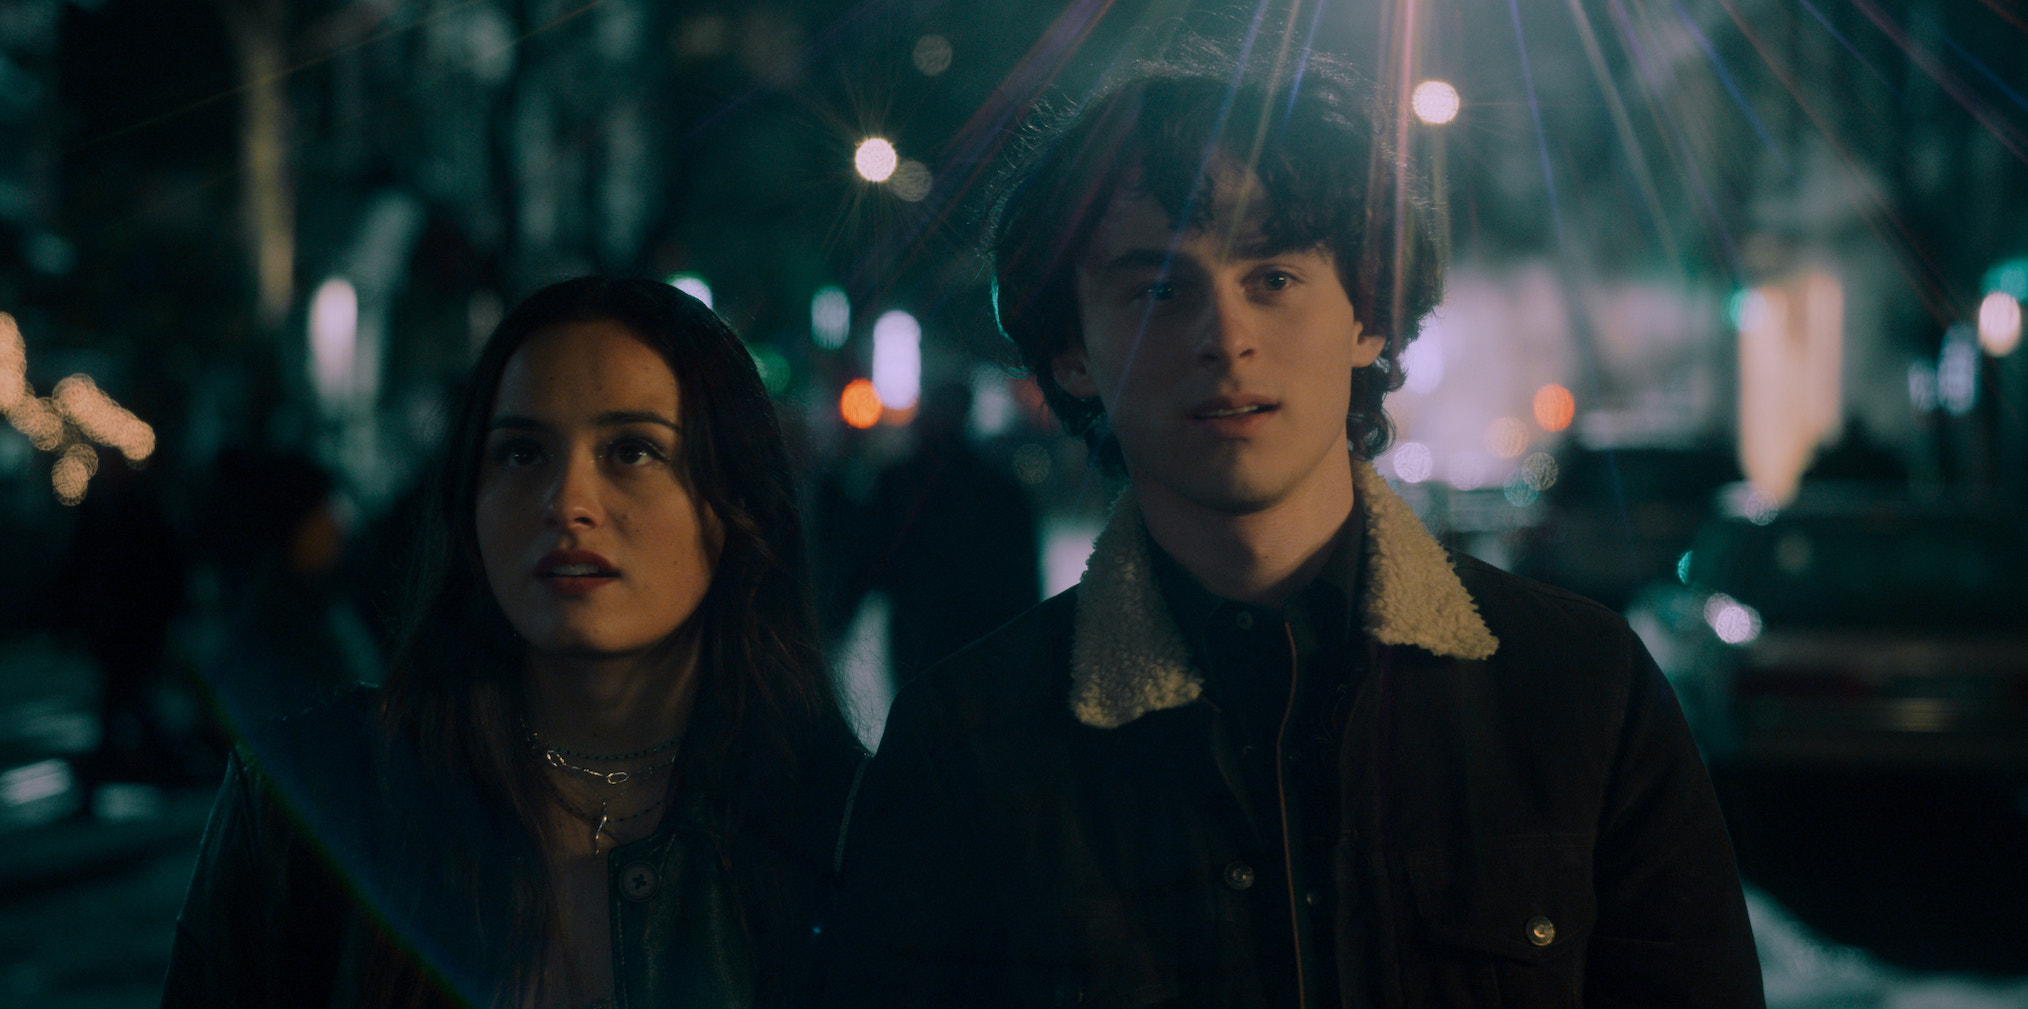 Chase Sui Wonders and Wyatt Oleff in 'City on Fire'